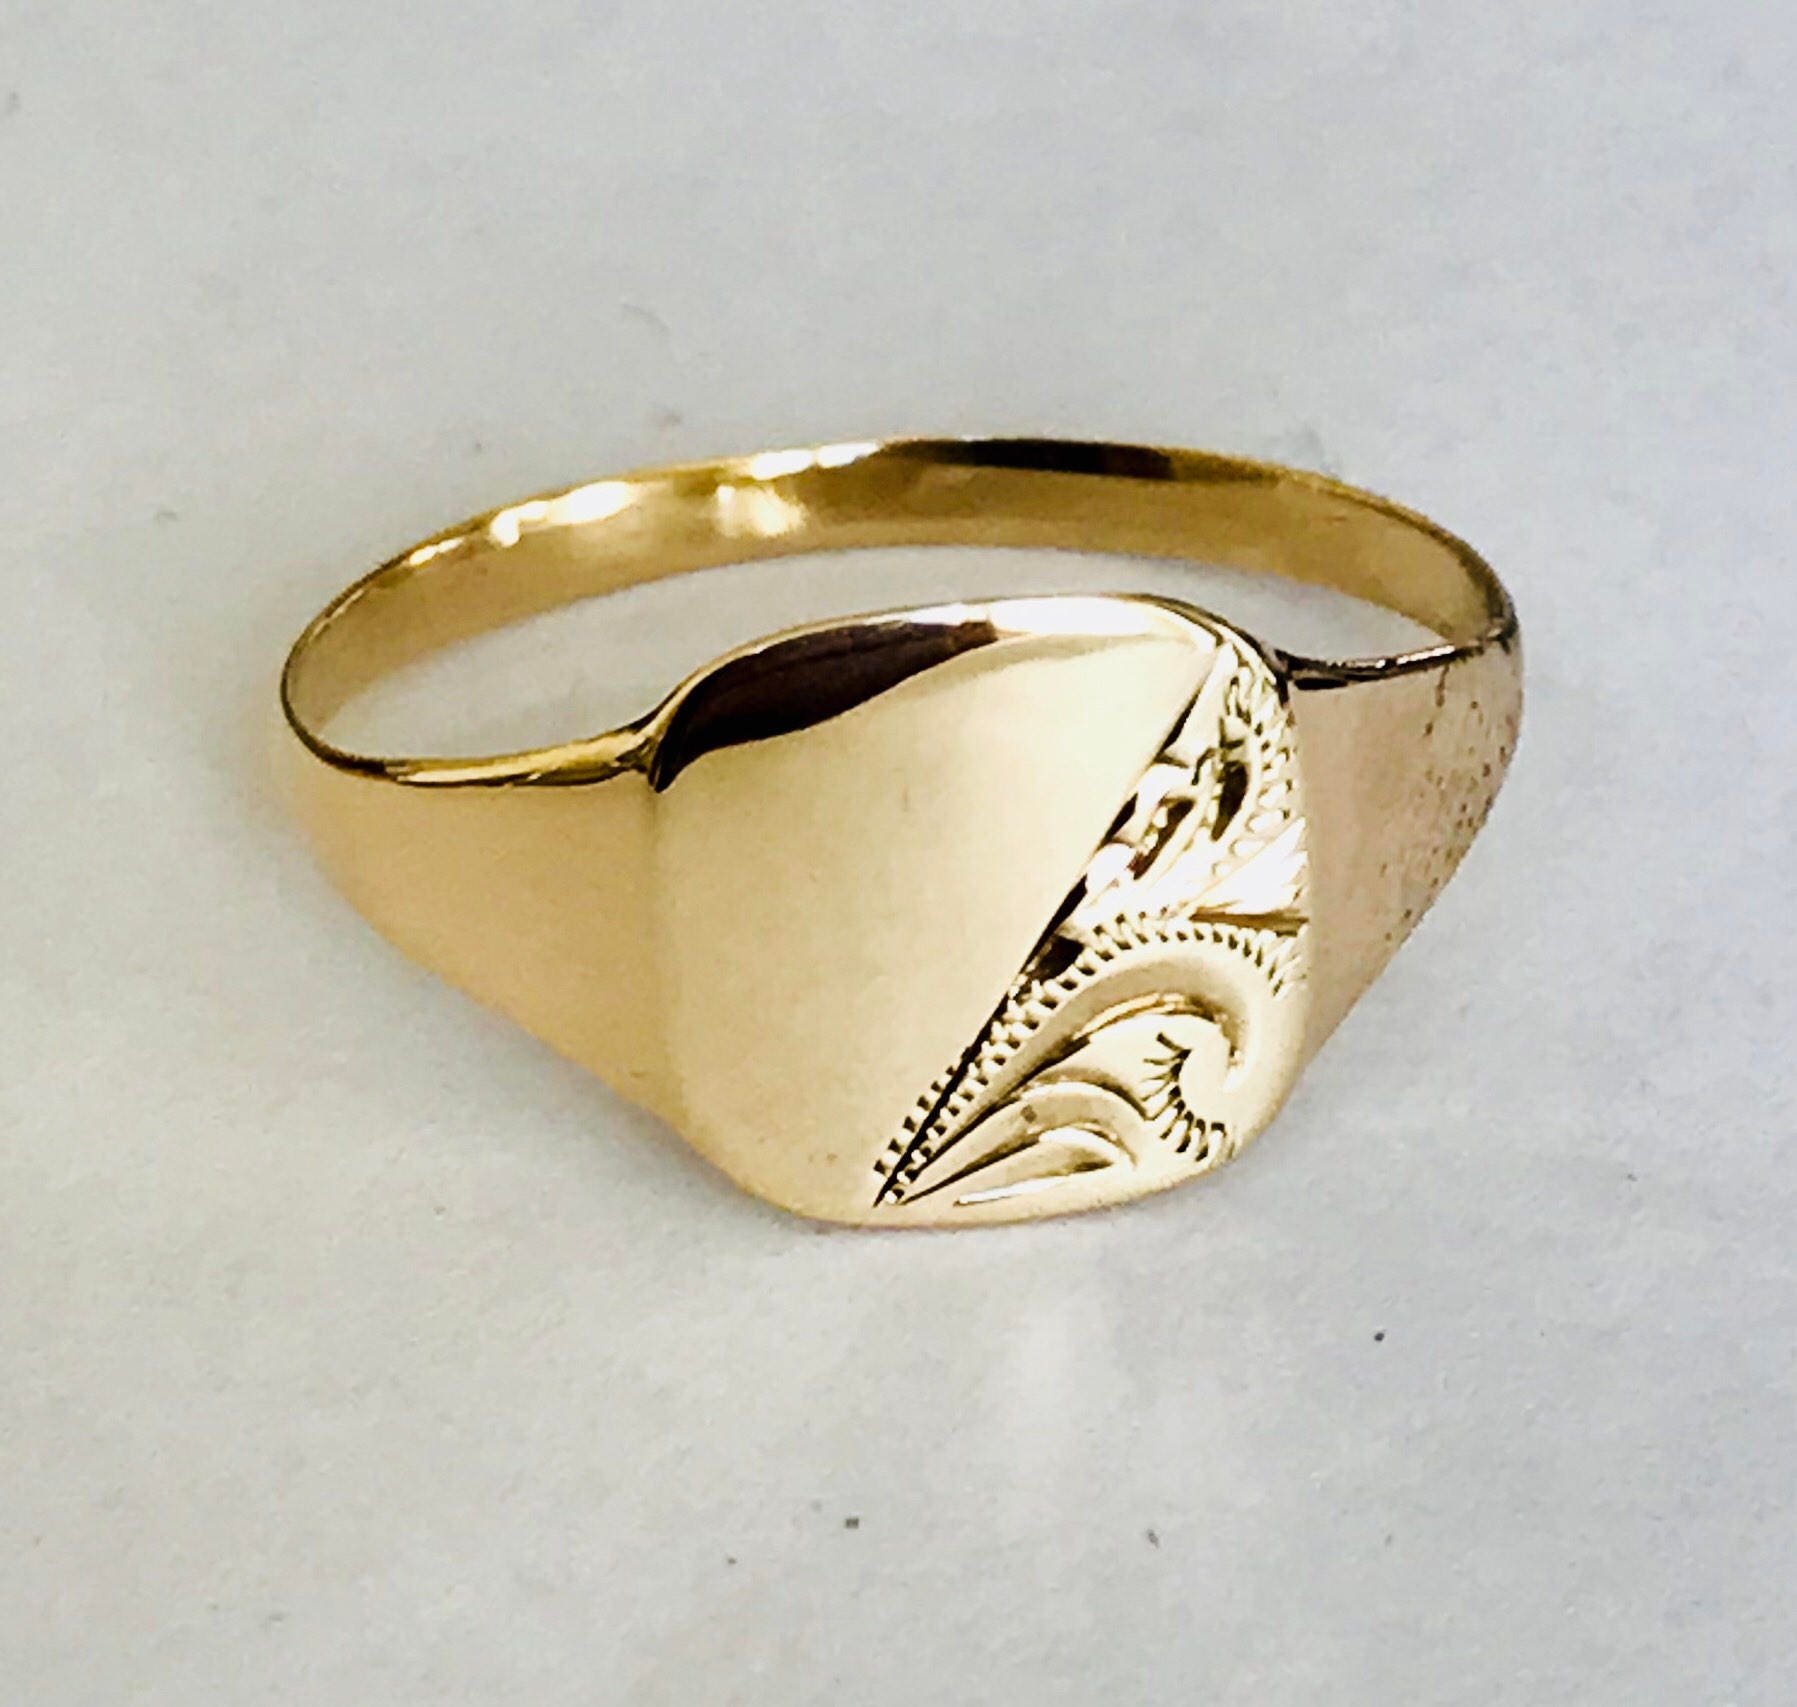 Large size vintage 9ct yellow gold Men's signet ring - fully hallmarked ...